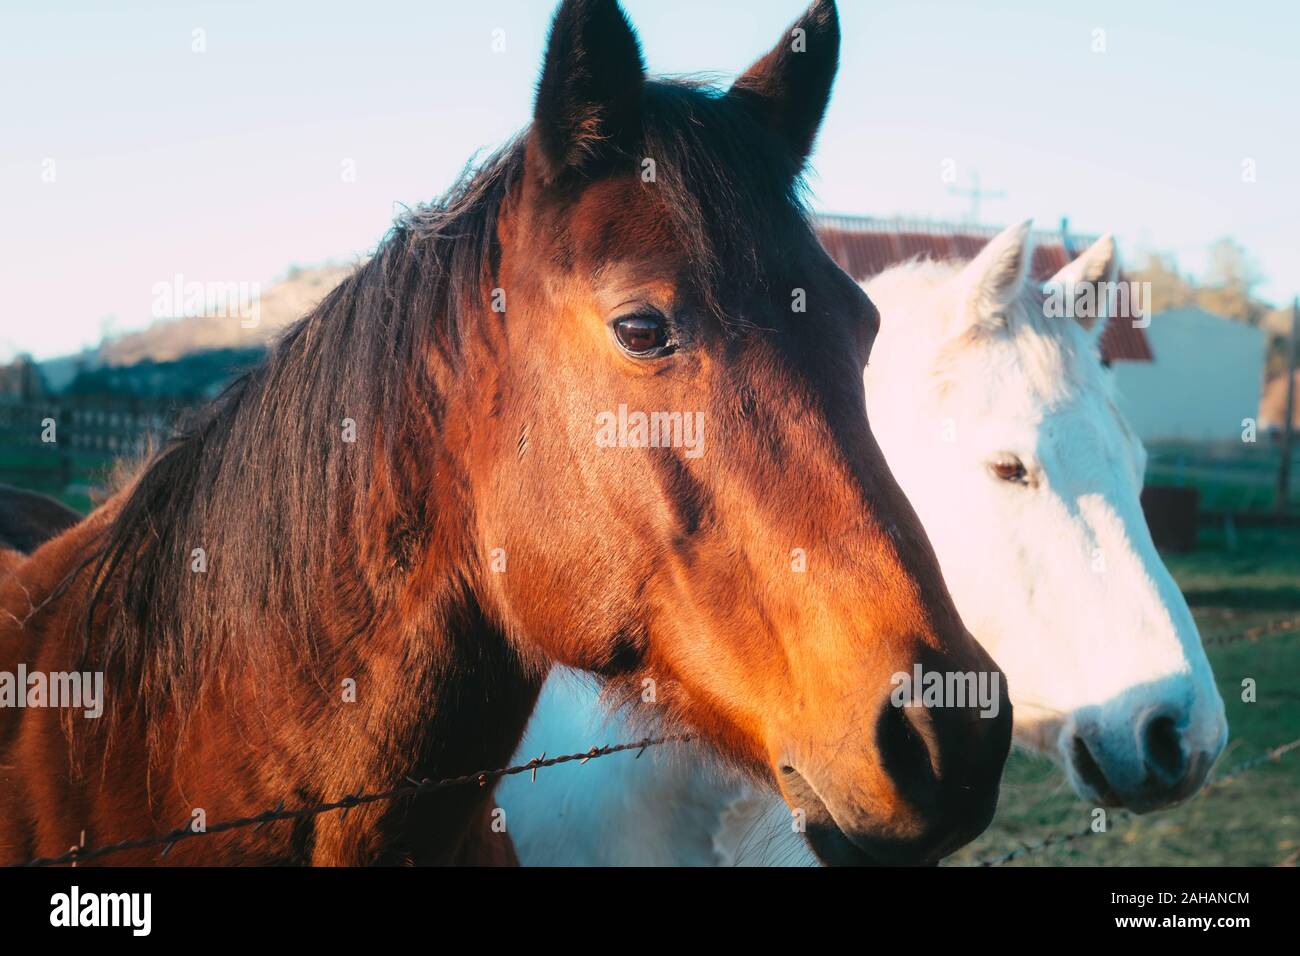 Two horses that are companions Stock Photo